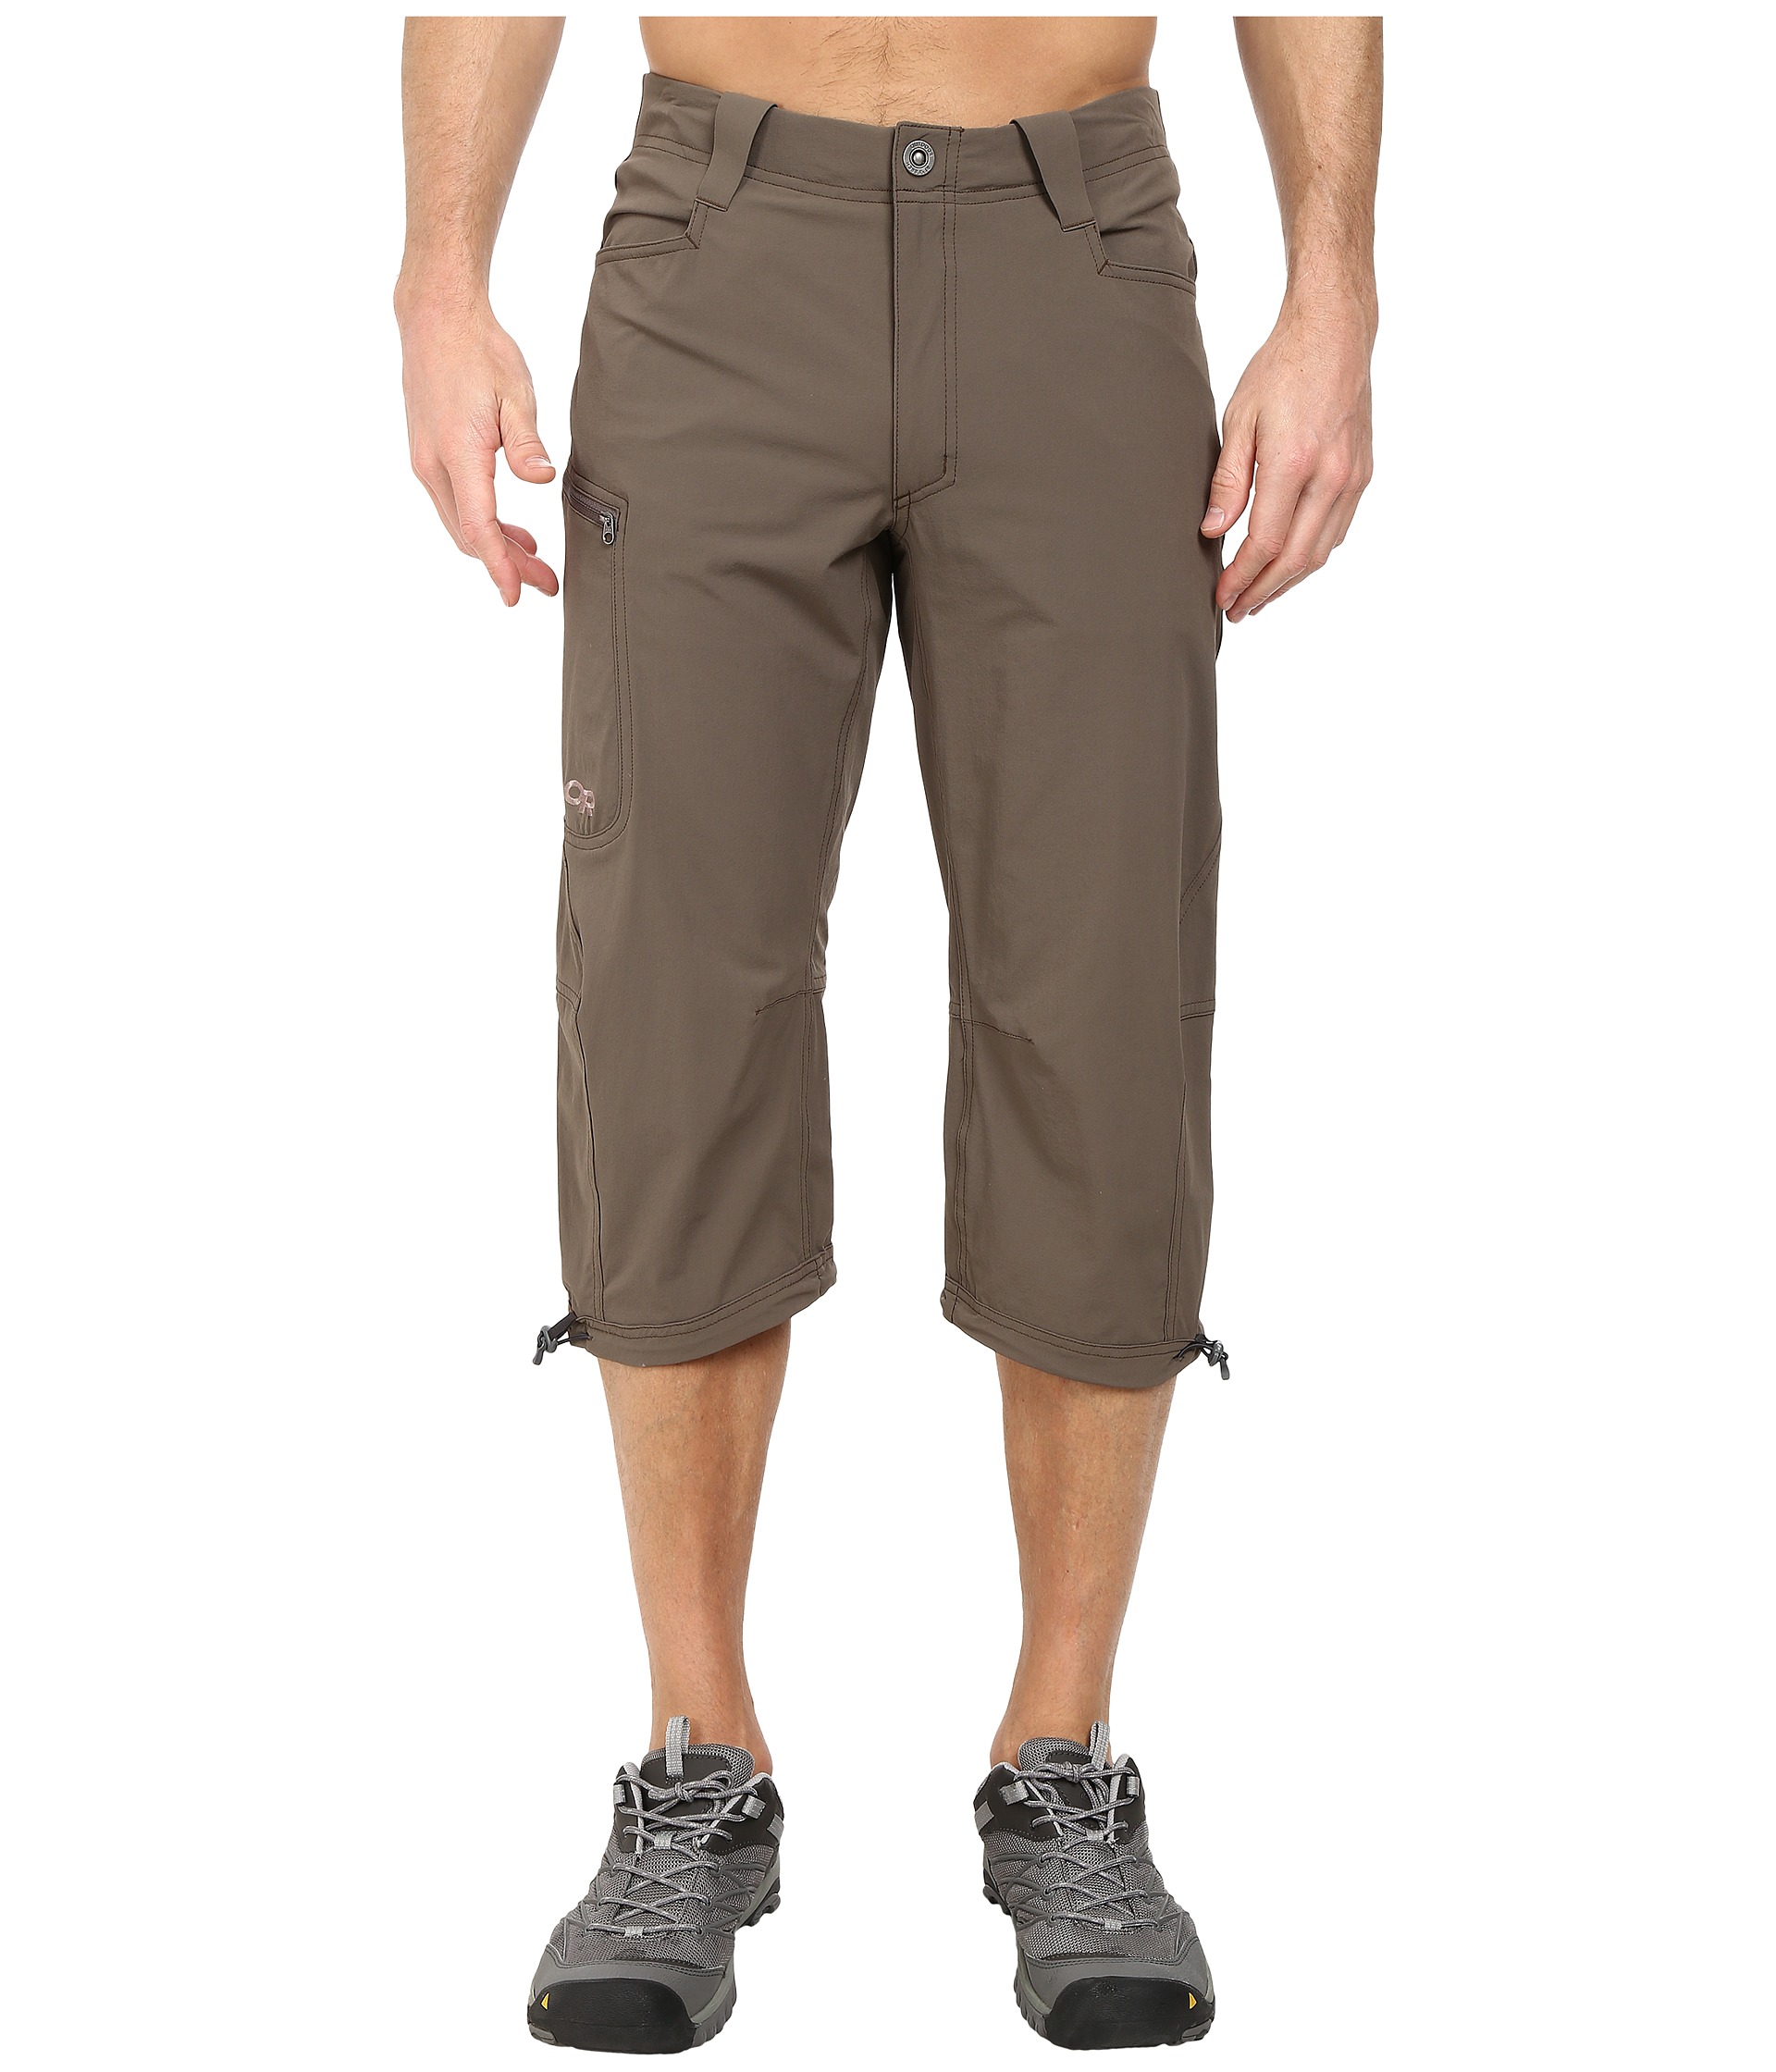 Outdoor Research Ferrosi 3/4 Pants at Zappos.com